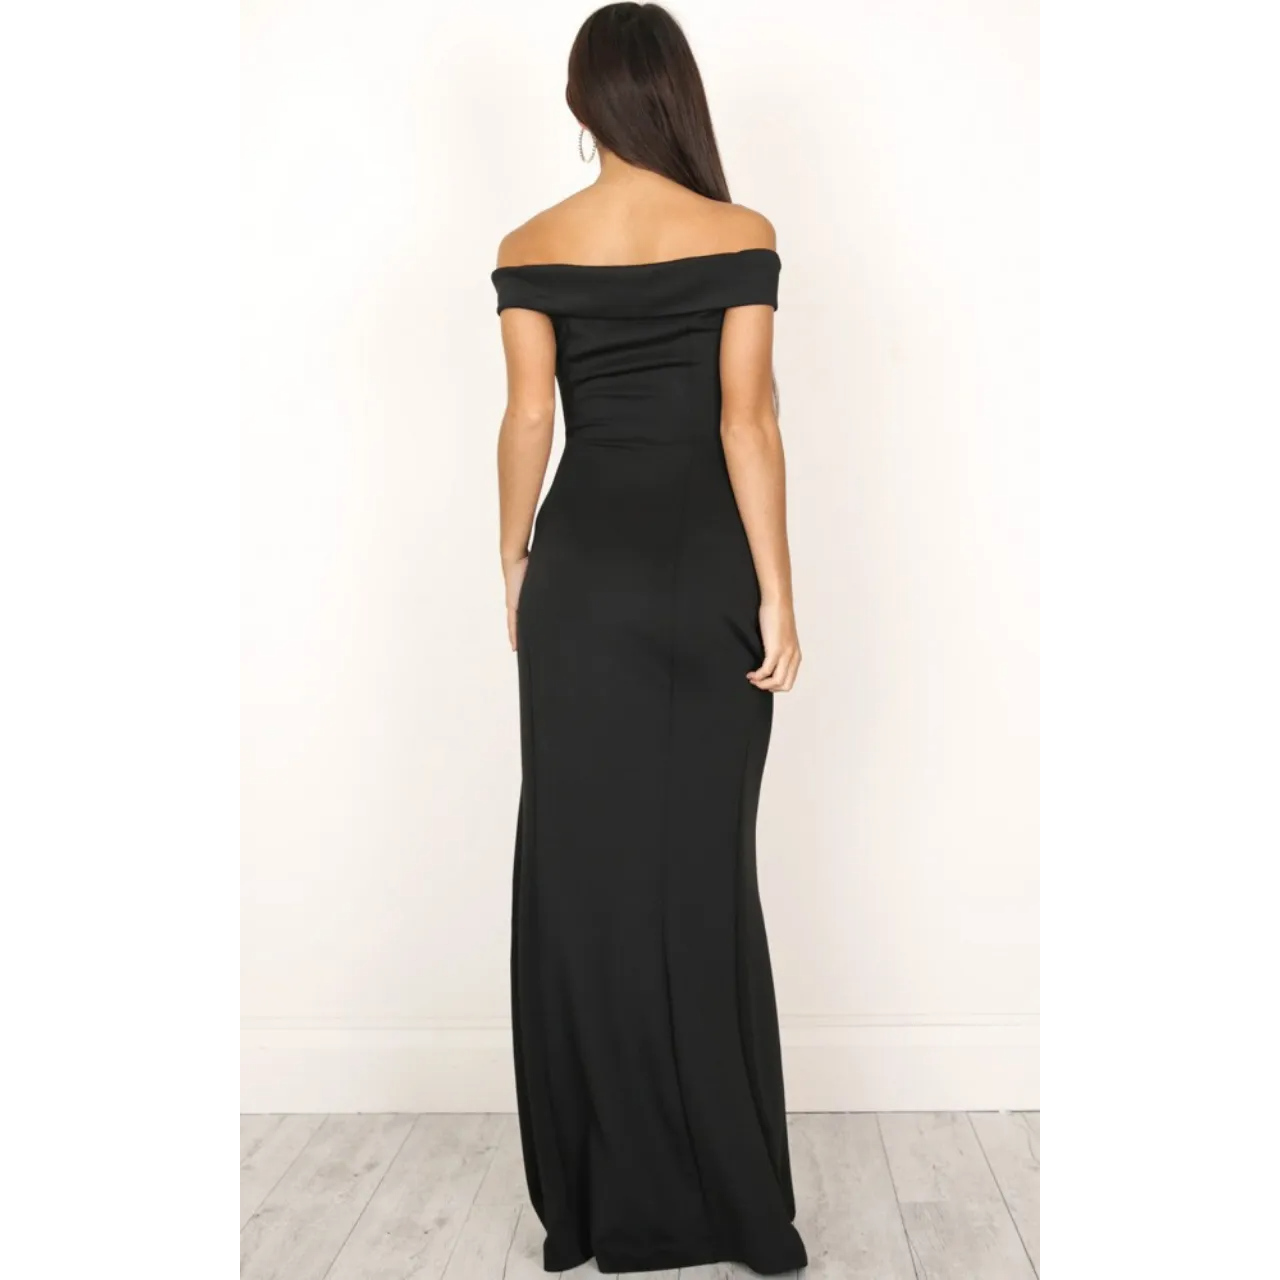 Rongoworks Minna Elegant Maxi Dress Rongoworks